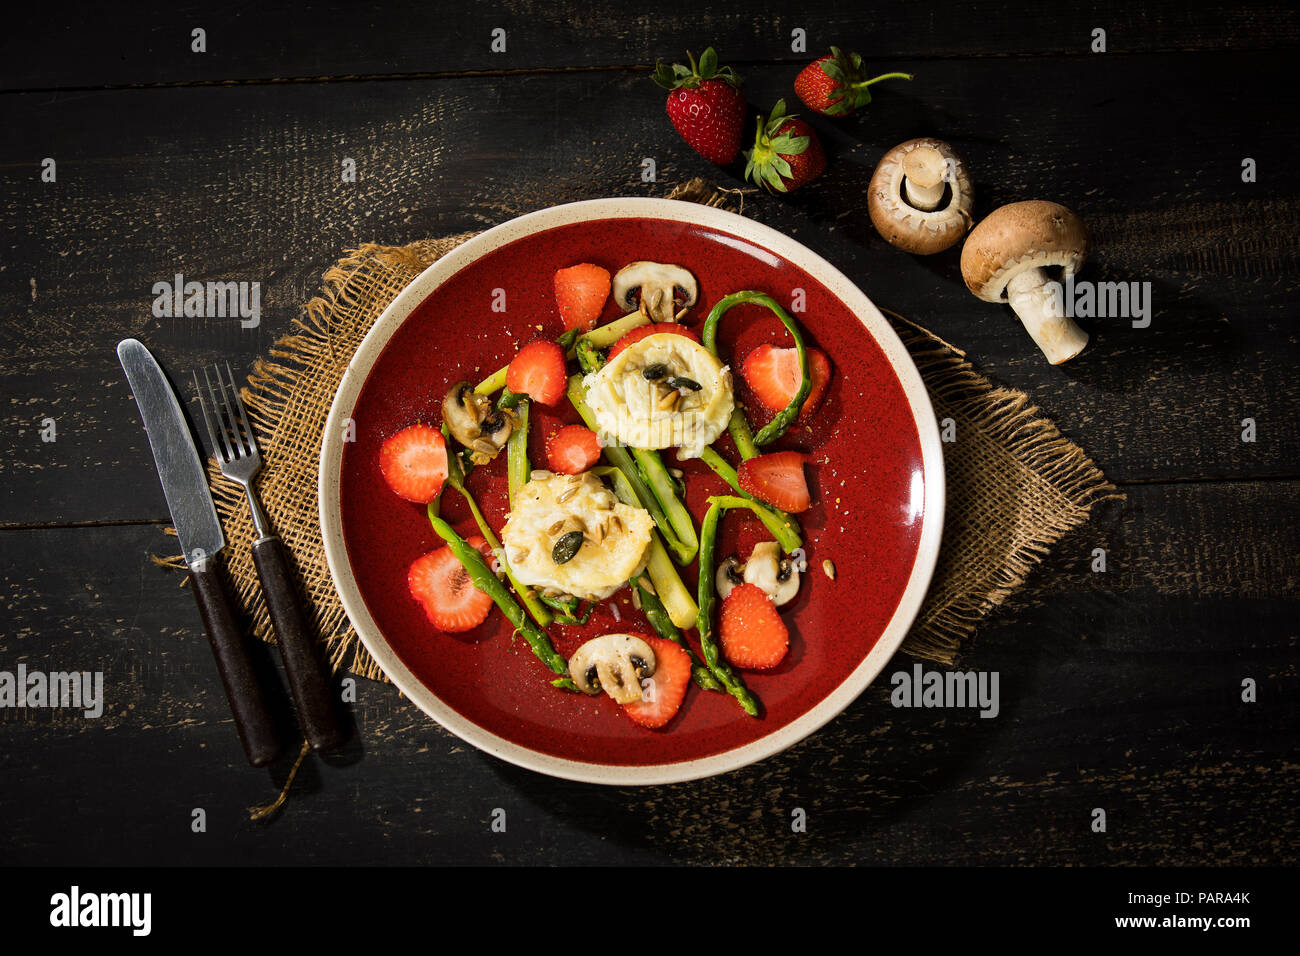 Salad with green asparagus, mushrooms, goat cheese, strawberries and roasted pine nuts Stock Photo